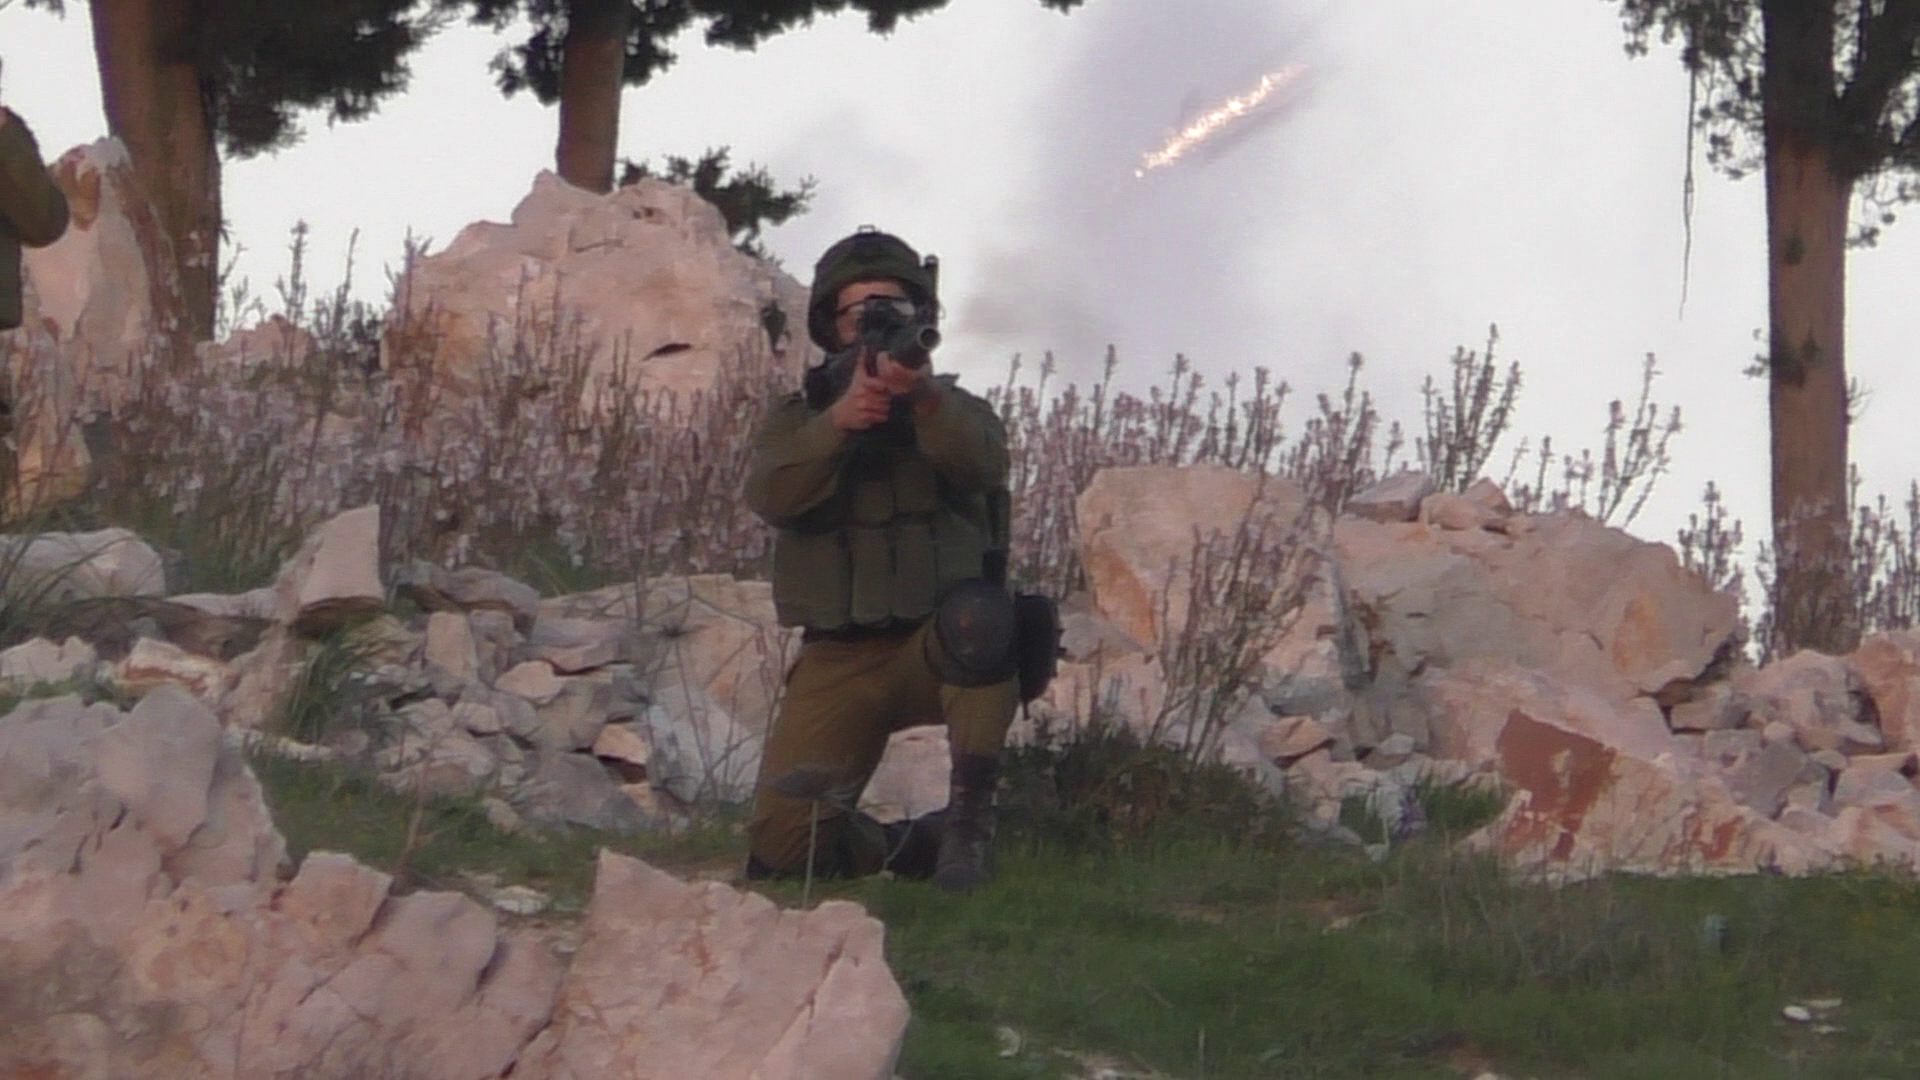 Burin, 7 March 2020: Settlers attack home at edge of village, soldiers open live fire at occupants